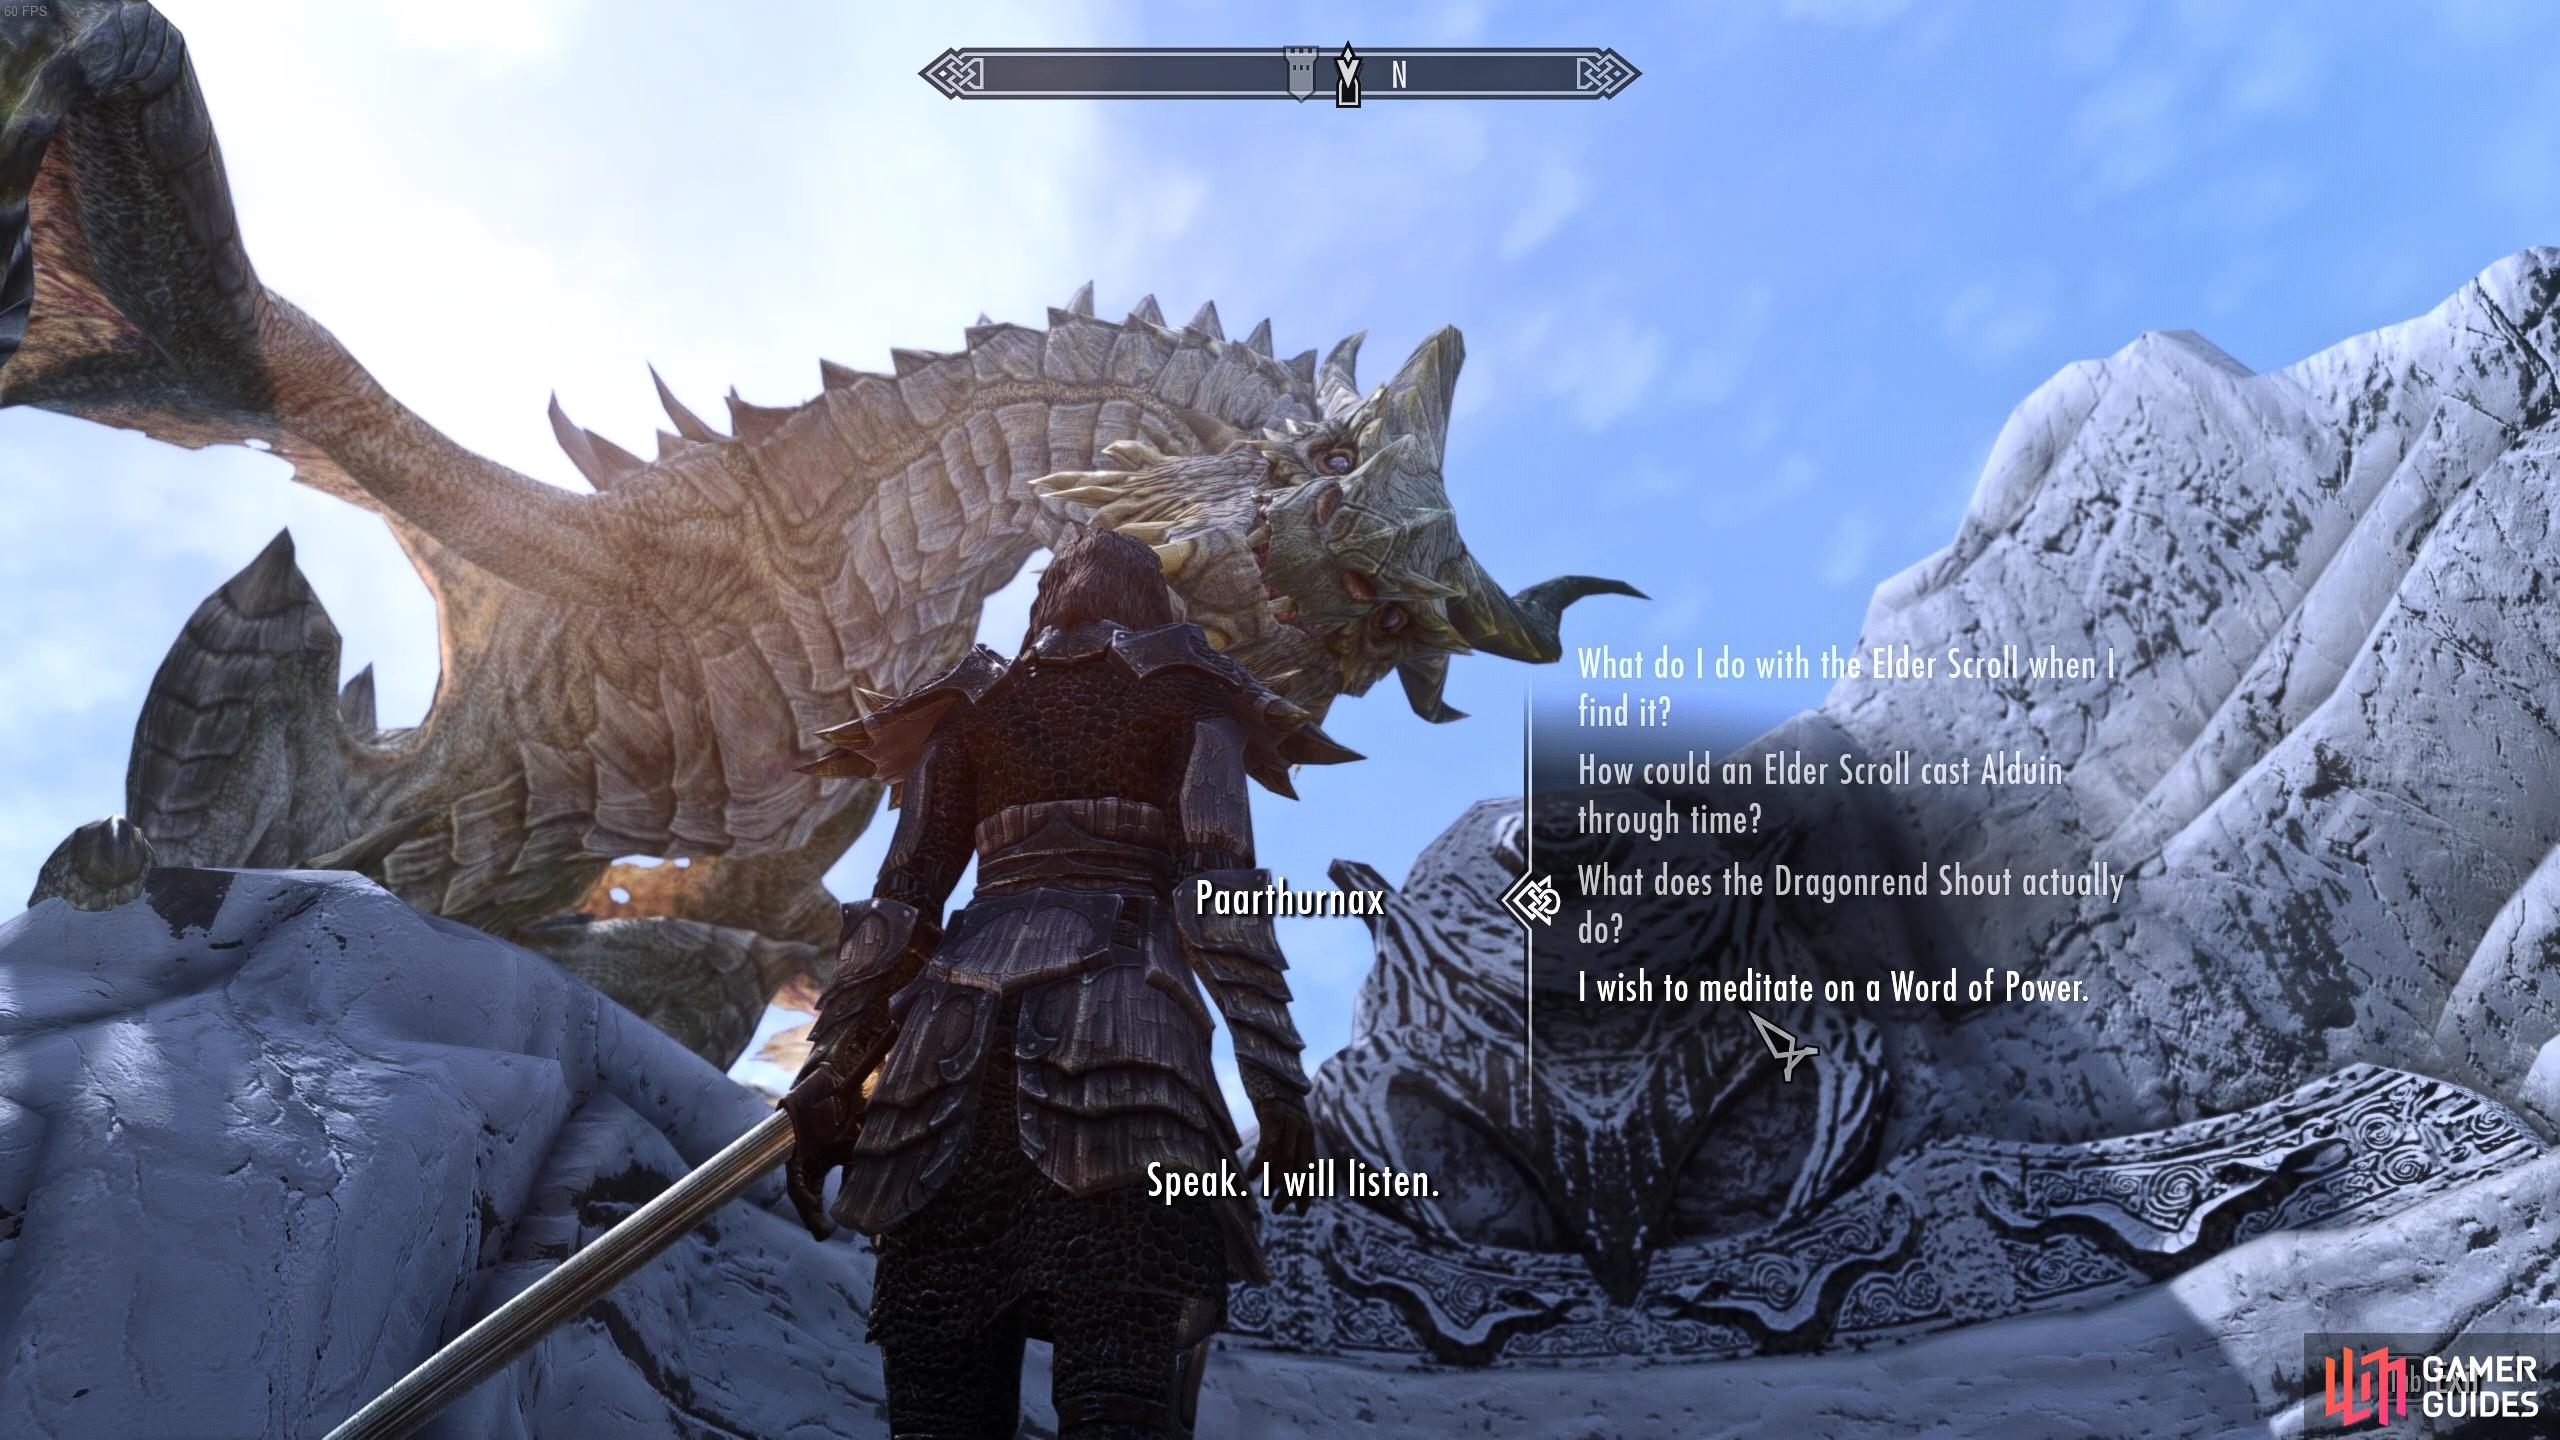 Be sure to meditate on a Word of Power with Paarthurnax before you leave.